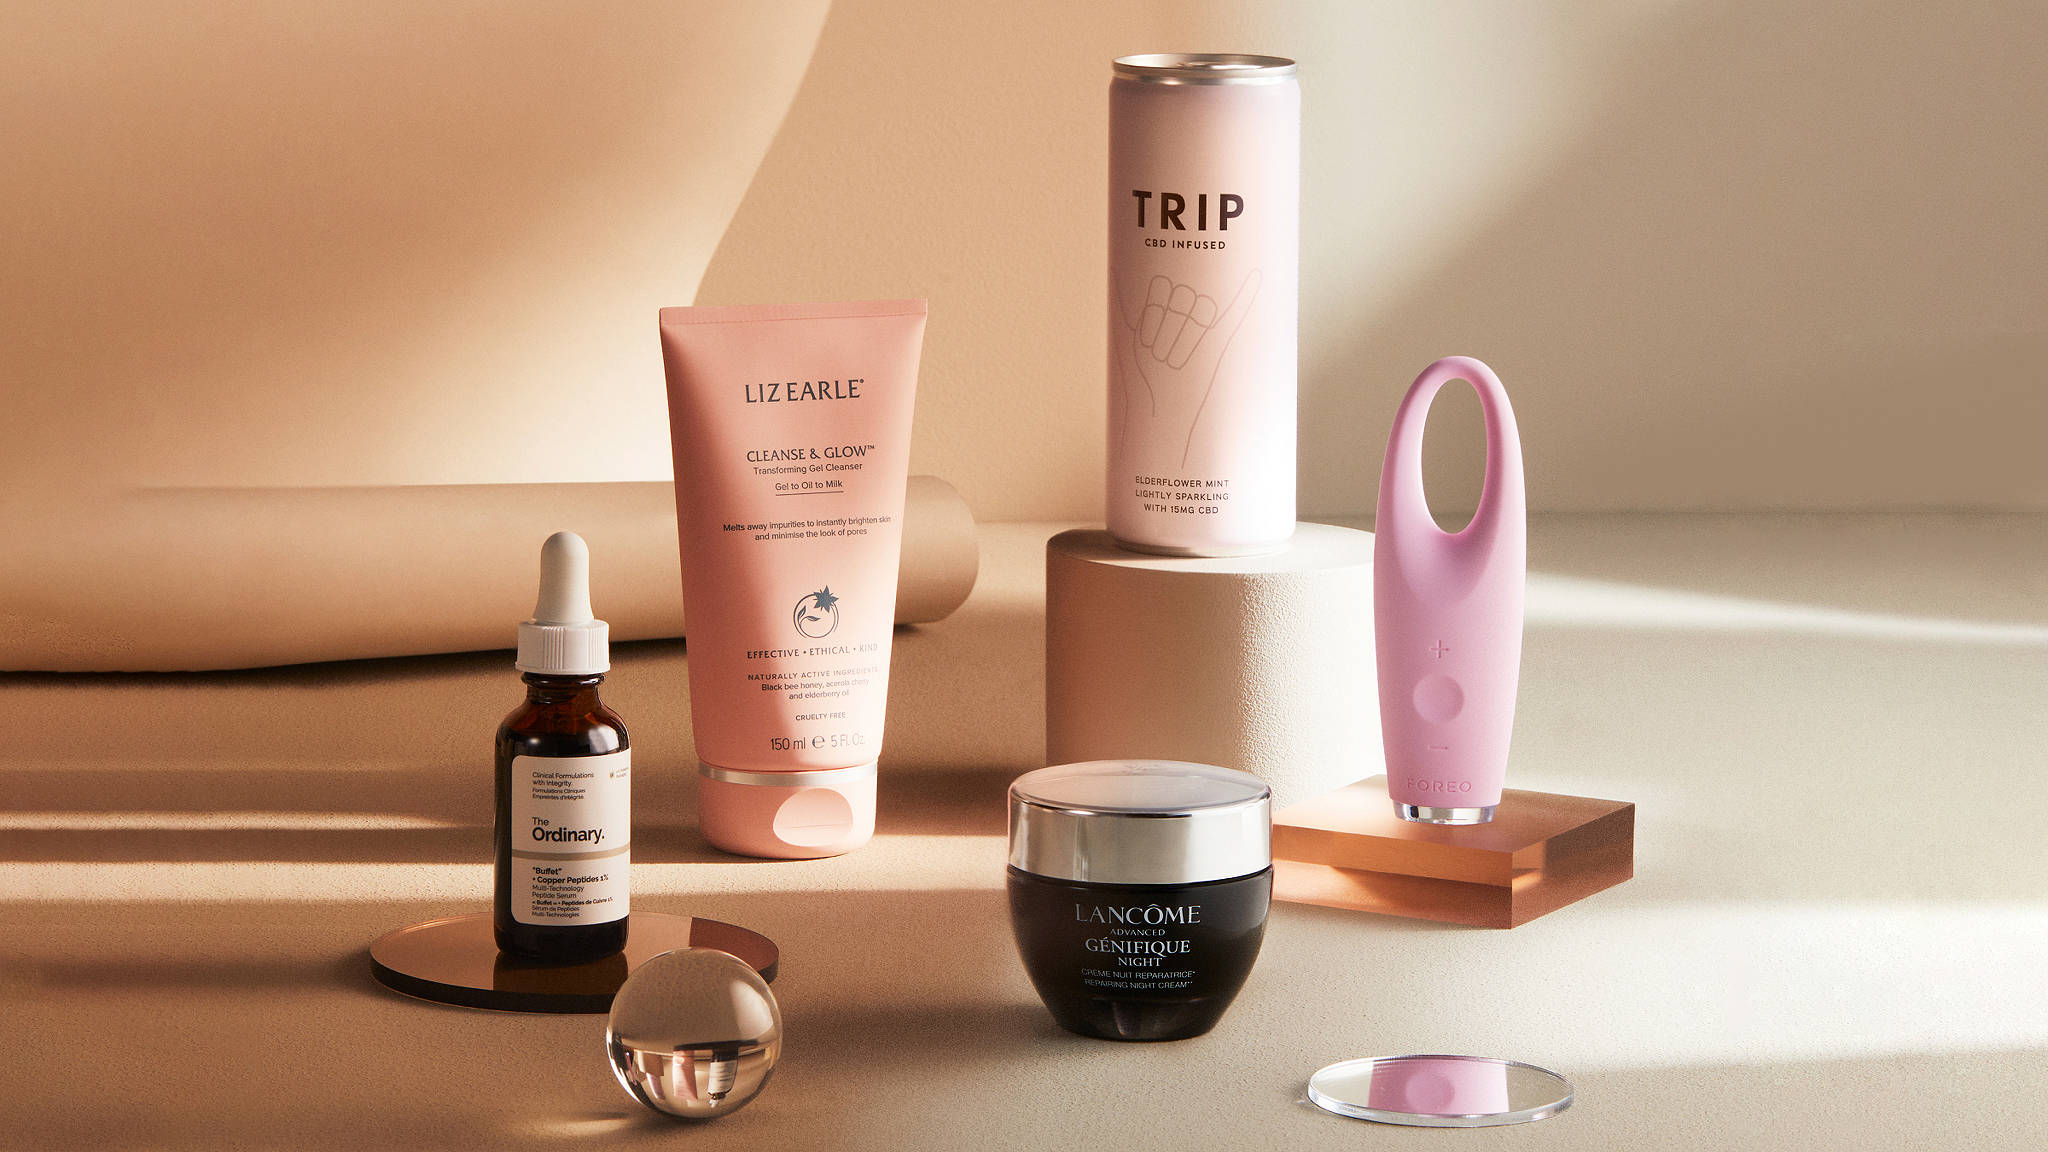 Your evening beauty routine, sorted